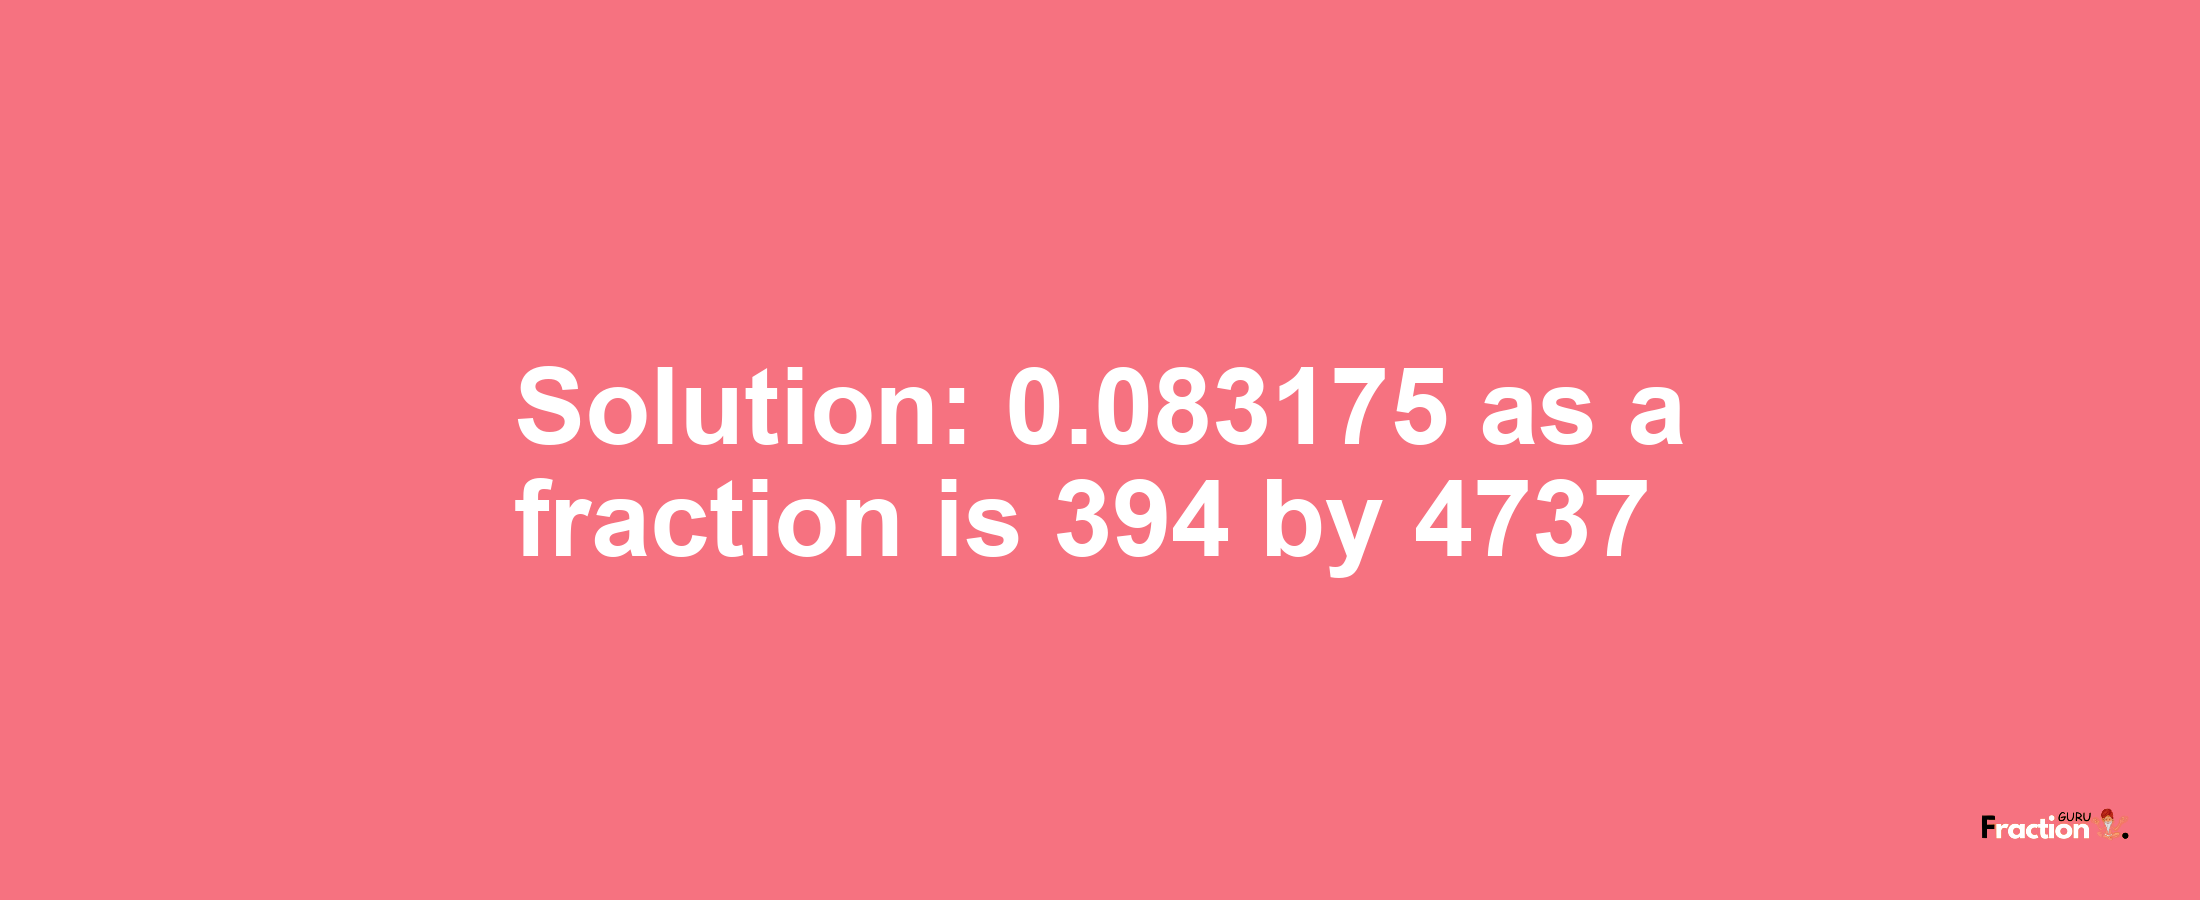 Solution:0.083175 as a fraction is 394/4737